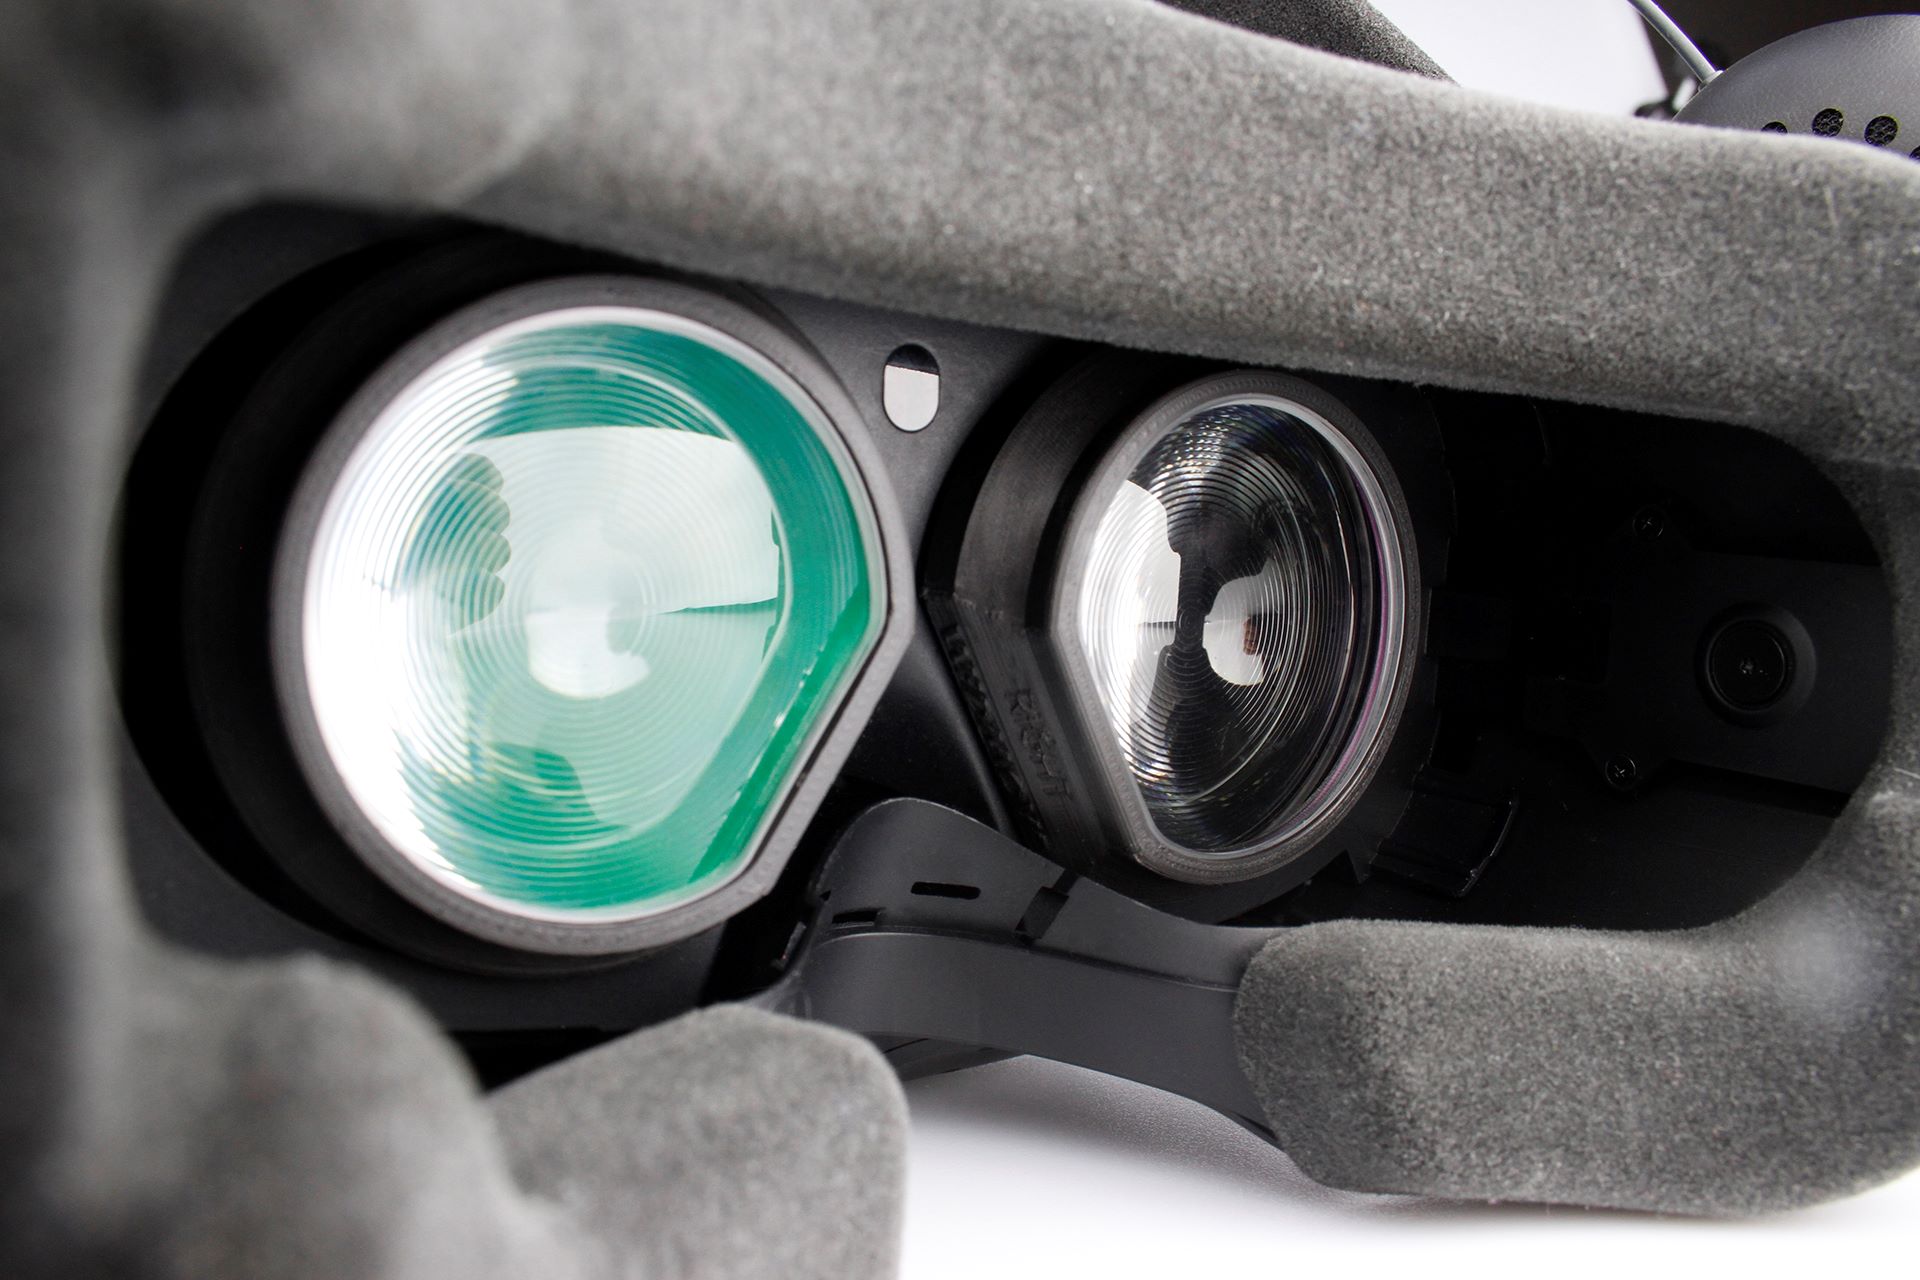 HTC Vive: How To Clean Lenses